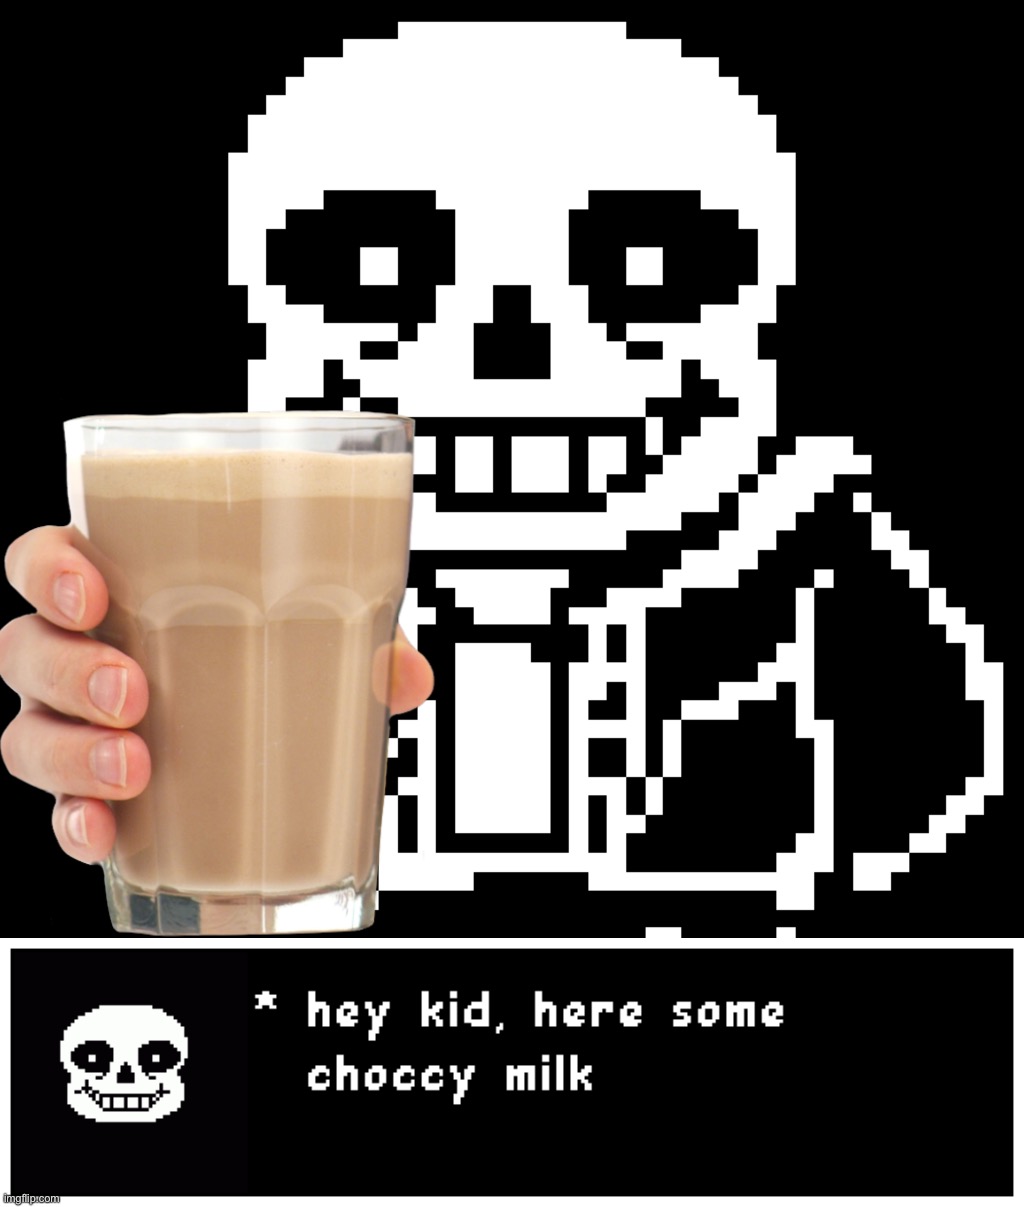 POV: Sans give you a Choccy Milk | image tagged in memes,funny,sans,undertale,pov,choccy milk | made w/ Imgflip meme maker